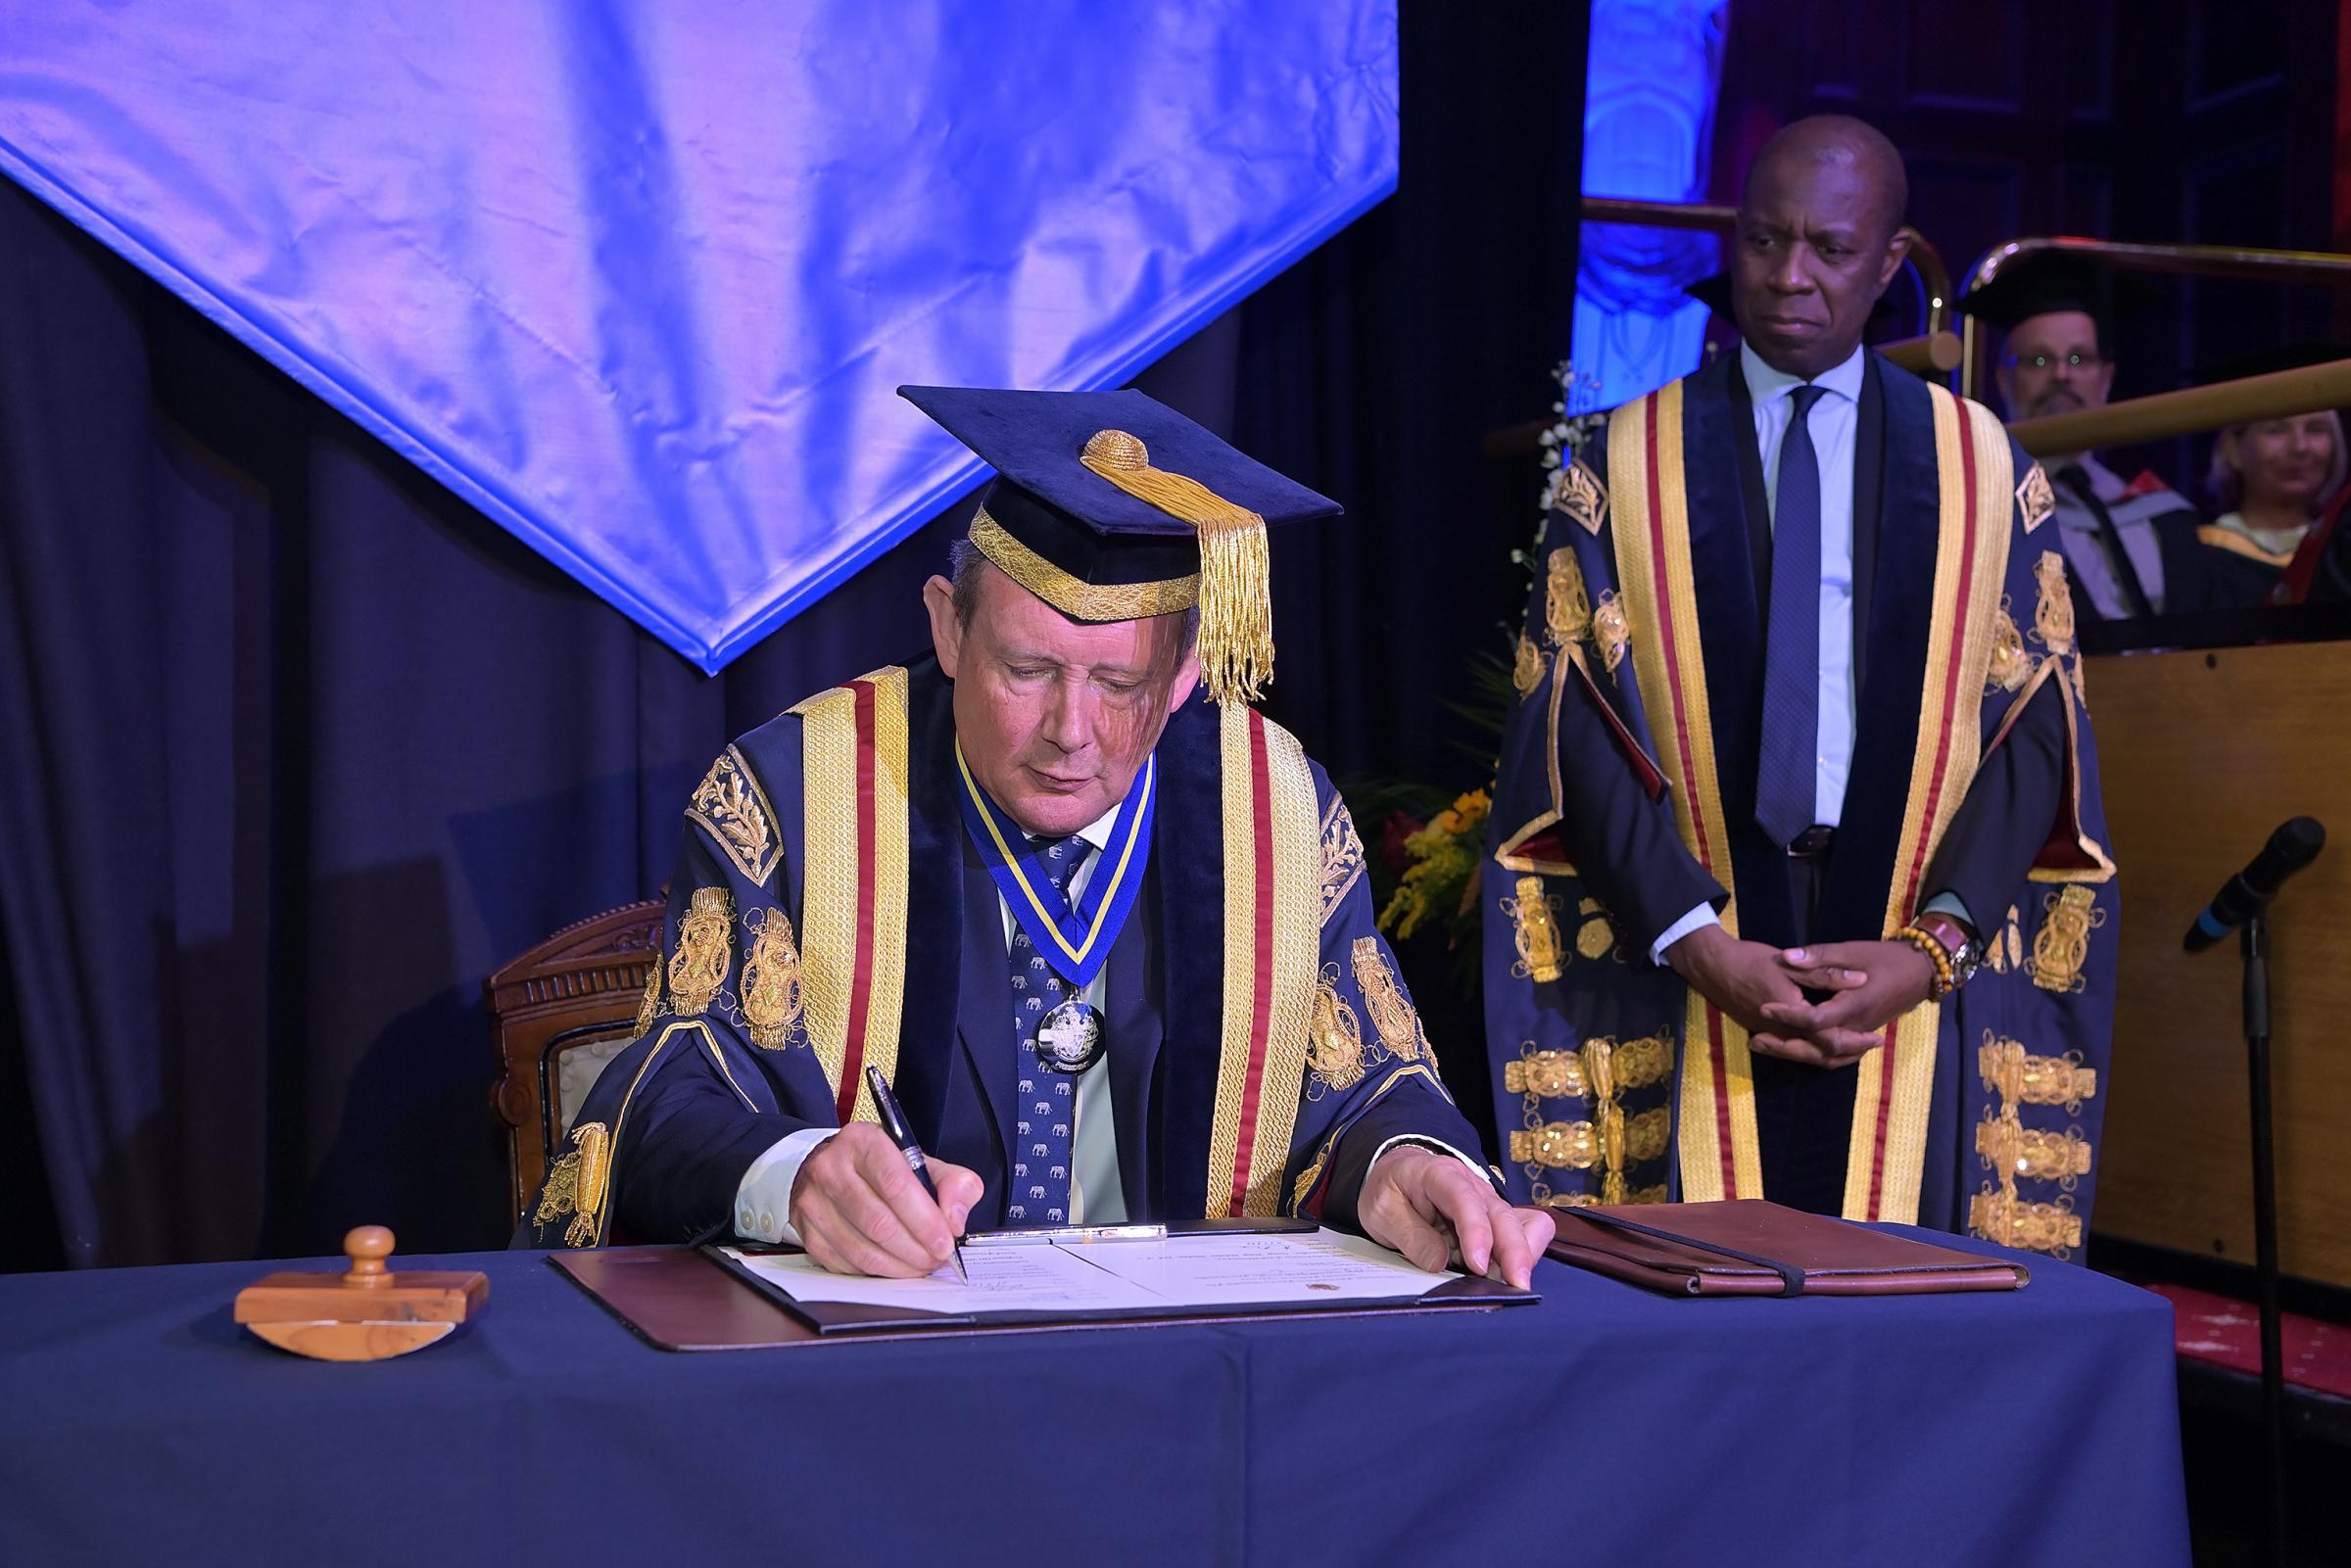 Clive Myrie was installed by Professor George E Holmes DL, President and Vice Chancellor Image: University of Bolton